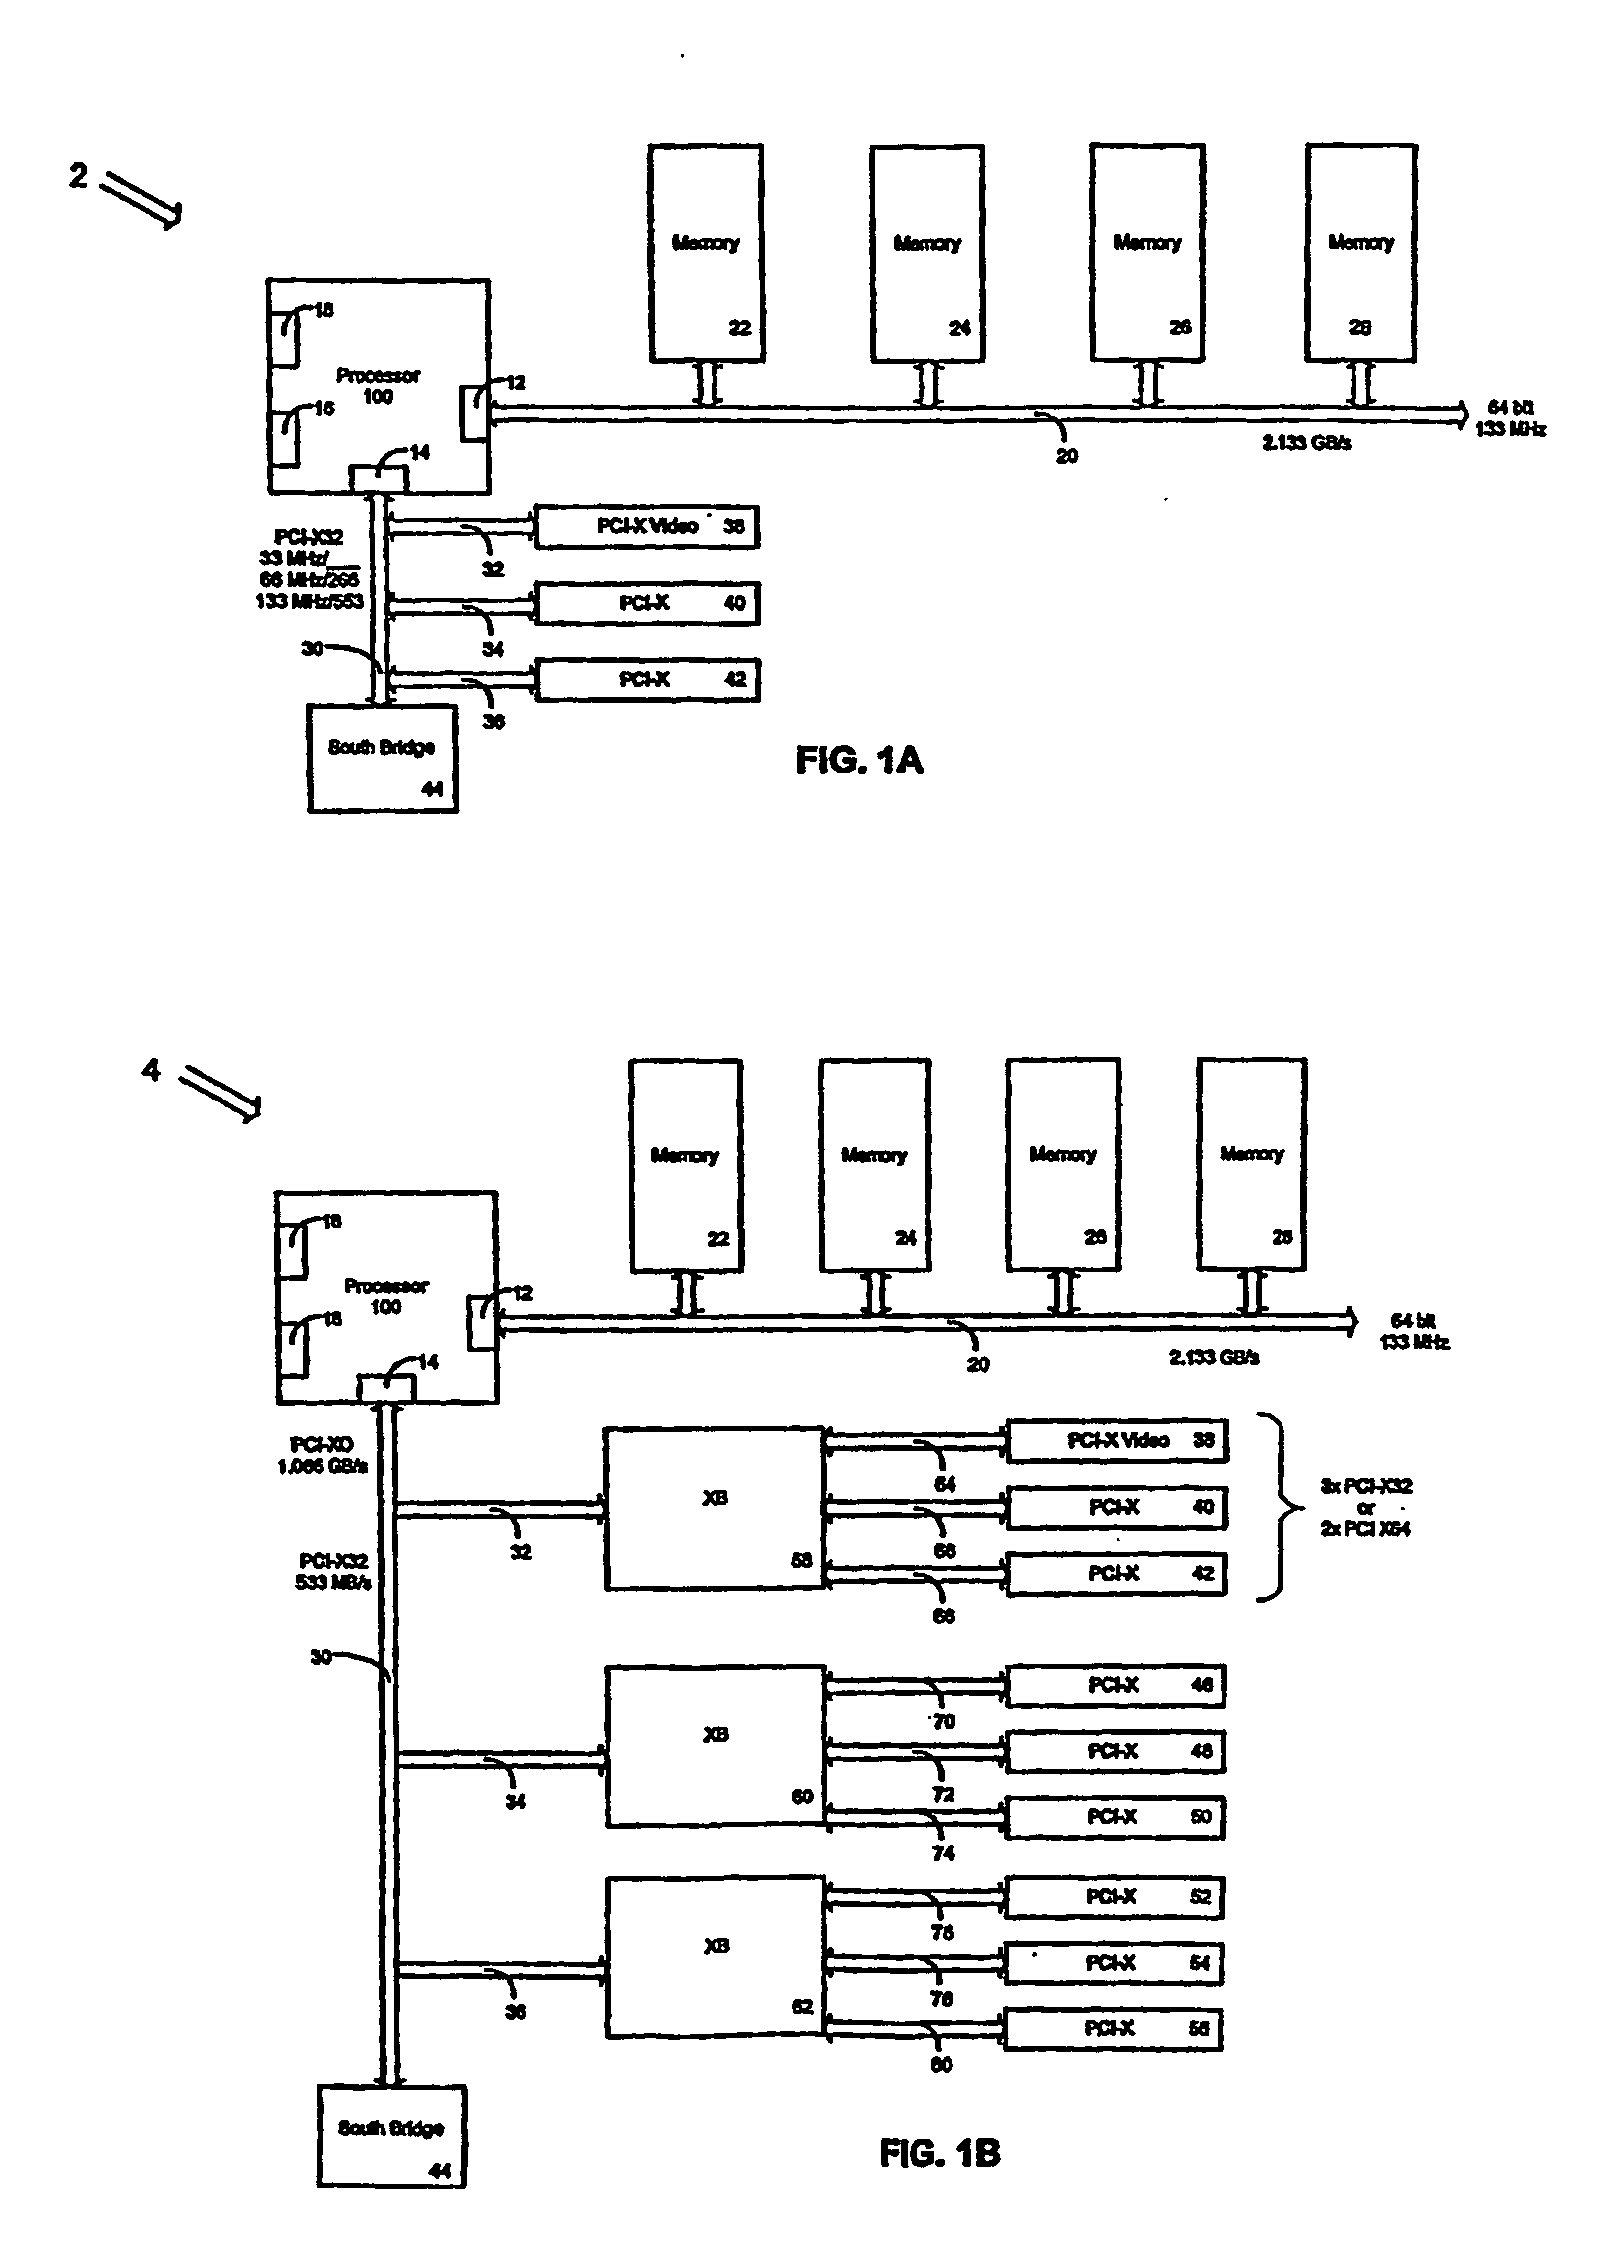 Apparatus, method and system for a synchronicity independent, resource delegating, power and instruction optimizing processor